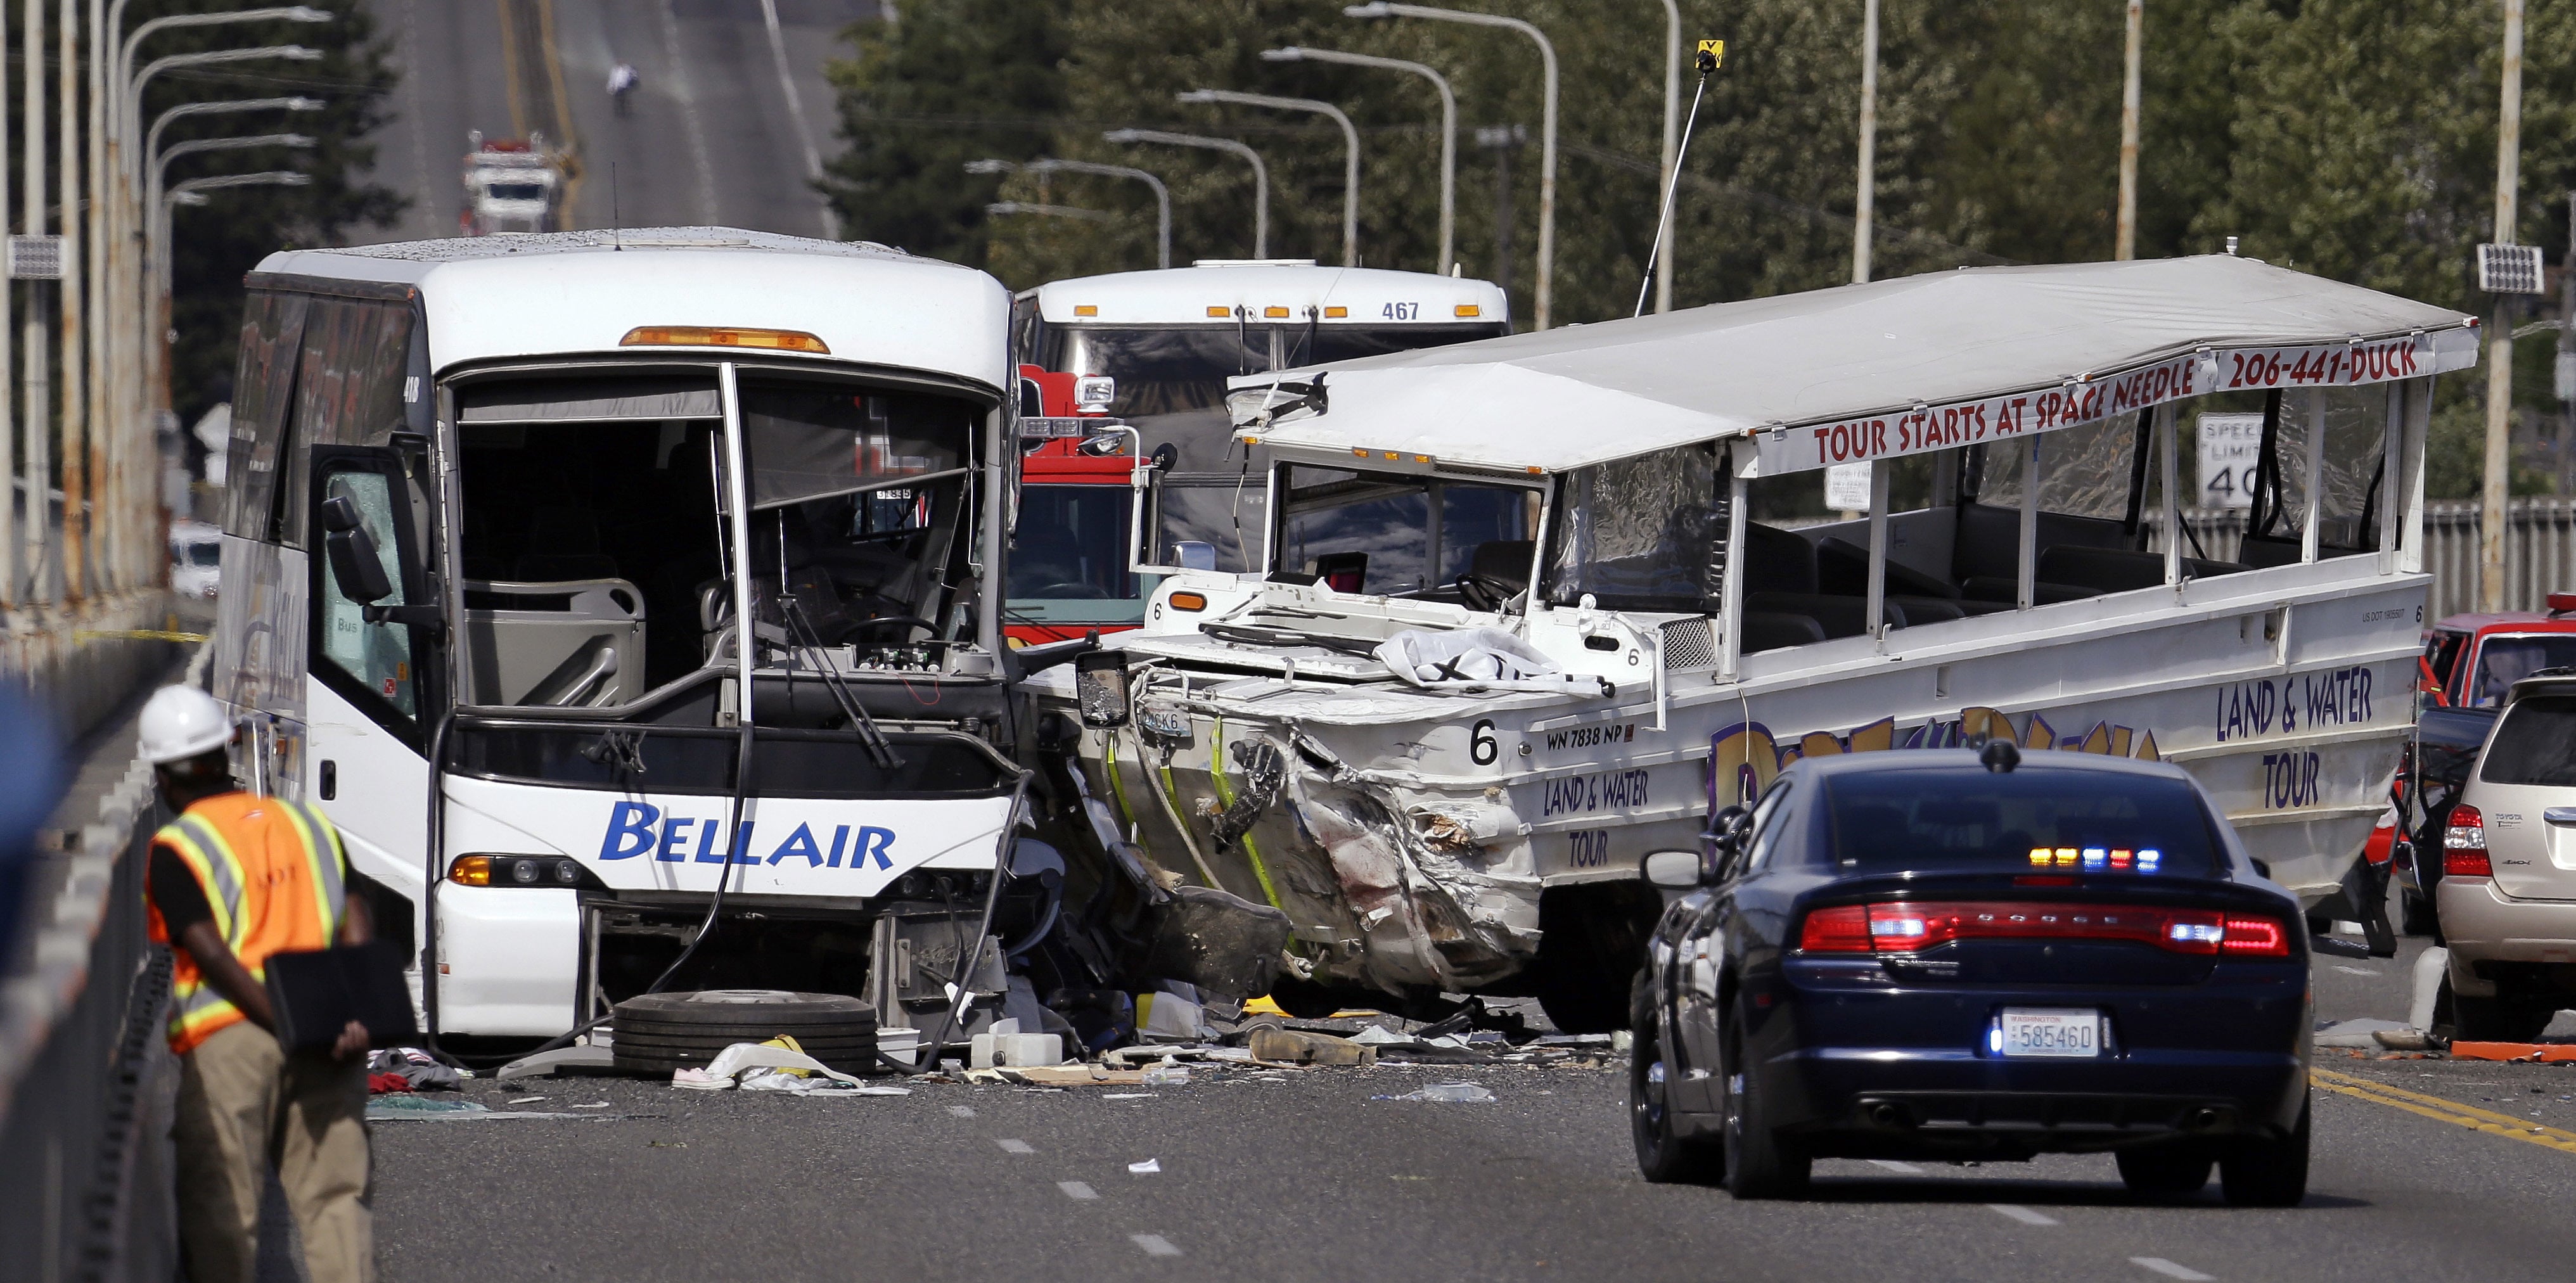 FILE - In this Sept. 24, 2015, file photo, a "Ride the Ducks" amphibious tour bus, right, and a charter bus remain at the scene of a multiple fatality collision on the Aurora Bridge in Seattle. A jury has awarded about $123 million to victims and families in a 2015 duck boat crash that killed five college students and wounded more than 60 others in Seattle. The Seattle Times reports Thursday, Feb. 7, 2019 that King County Superior Court jurors after a four-month civil trial found that Ride the Ducks International bore 67 percent of the responsibility for the crash, and tour vehicle operator Ride The Ducks of Seattle was 33 percent at fault.